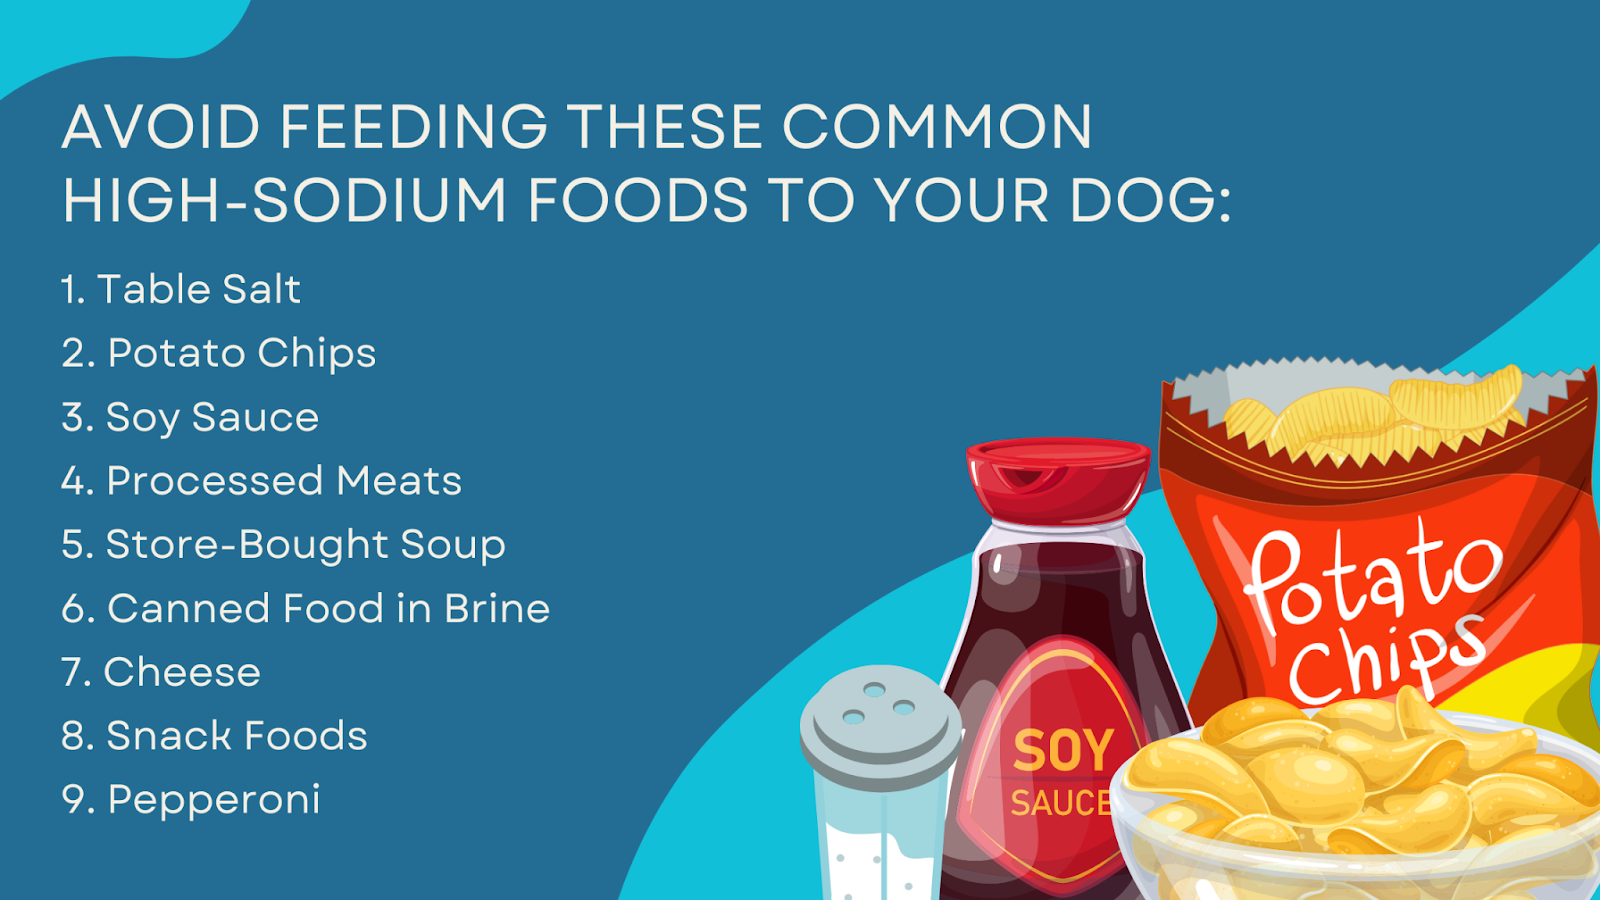 Avoid feeding these common high-sodium foods to your dog